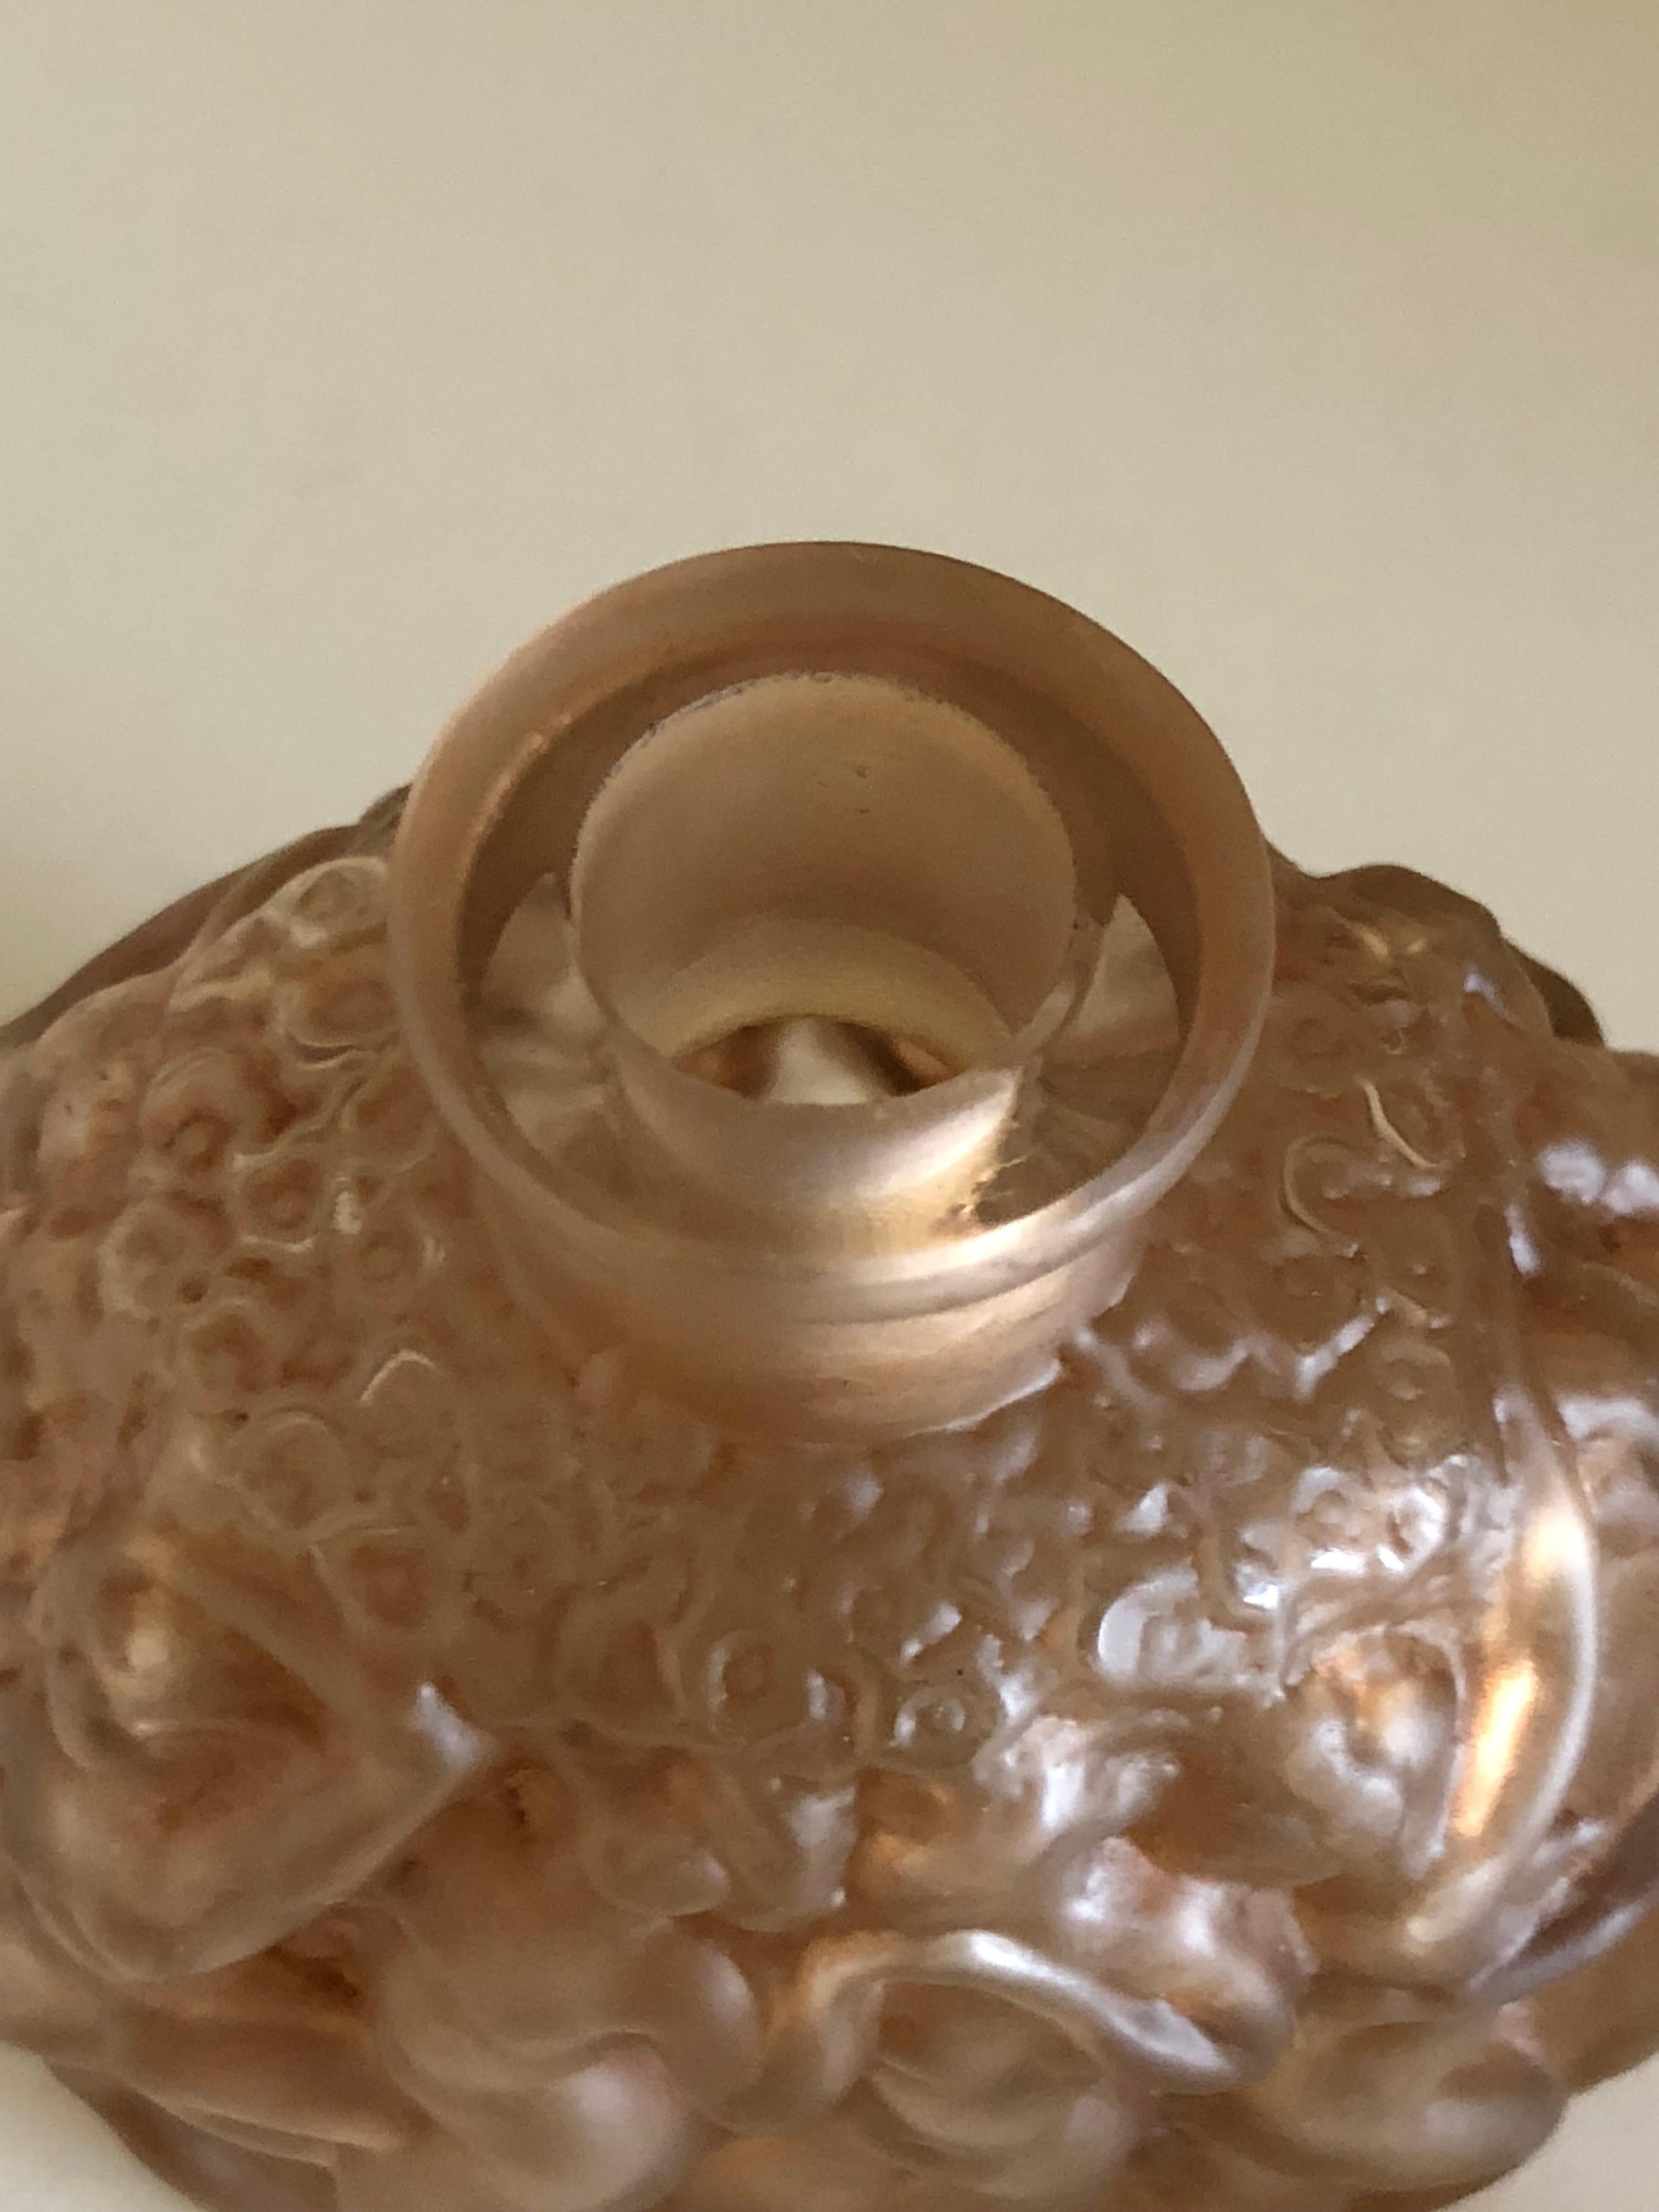 Molded 1937 René Lalique Calendal Perfume Bottle for Molinard Sepia Stained Glass